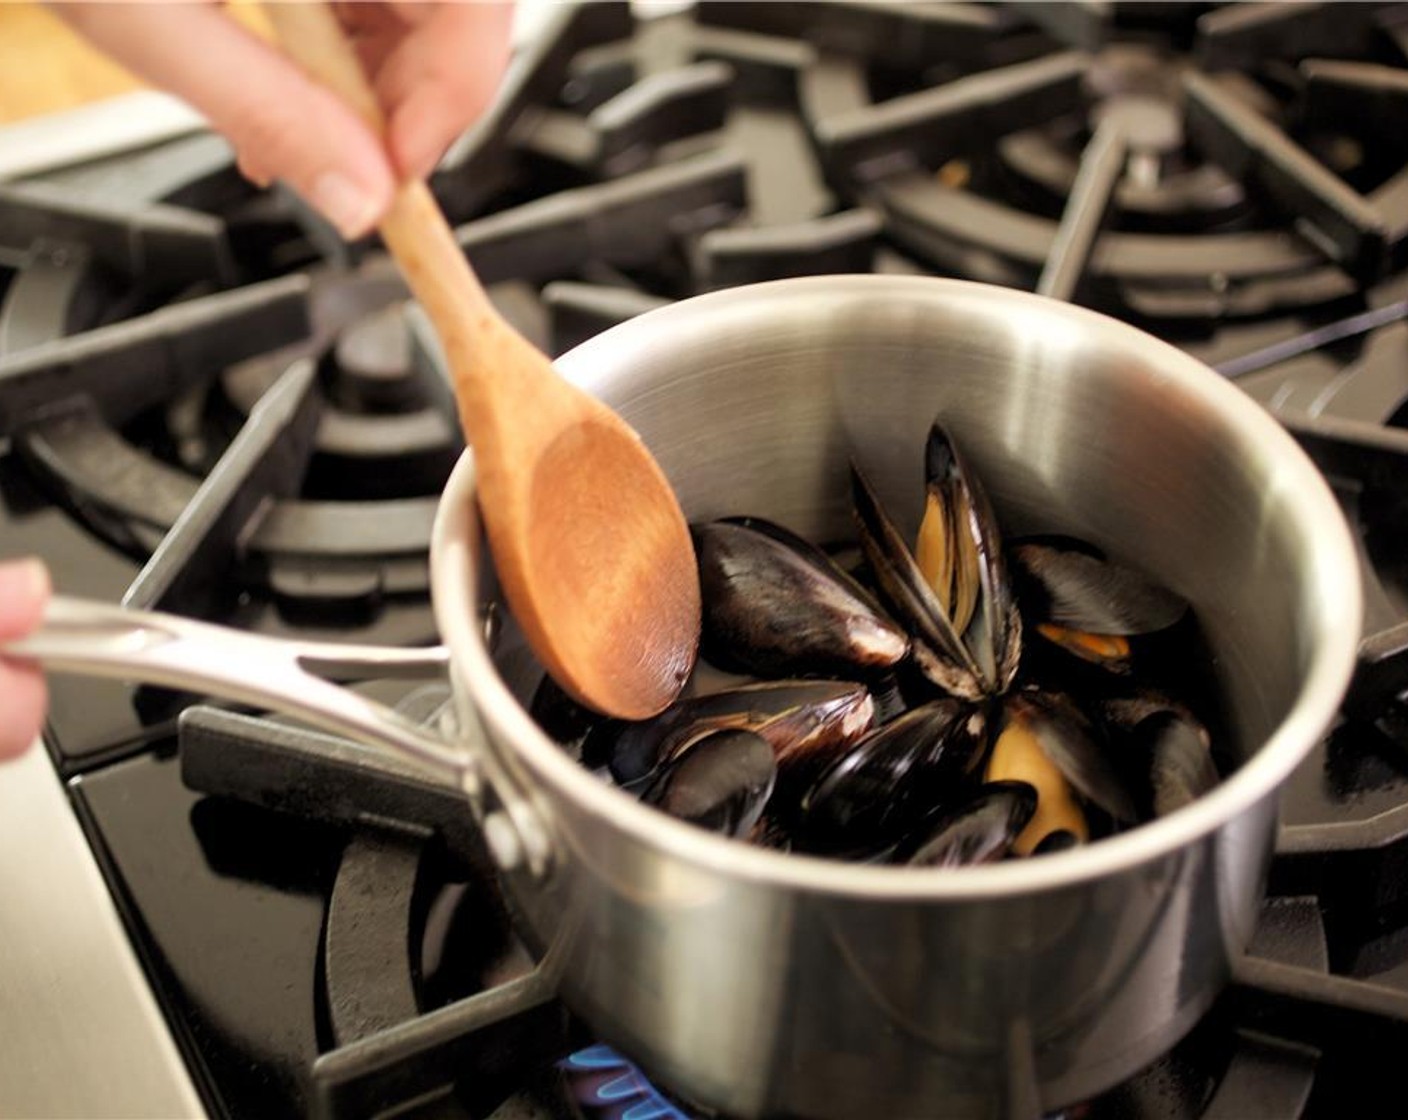 step 10 Carefully add mussels, being sure not to break the shells. Cover and simmer until mussels open and are just heated through, about two minutes.